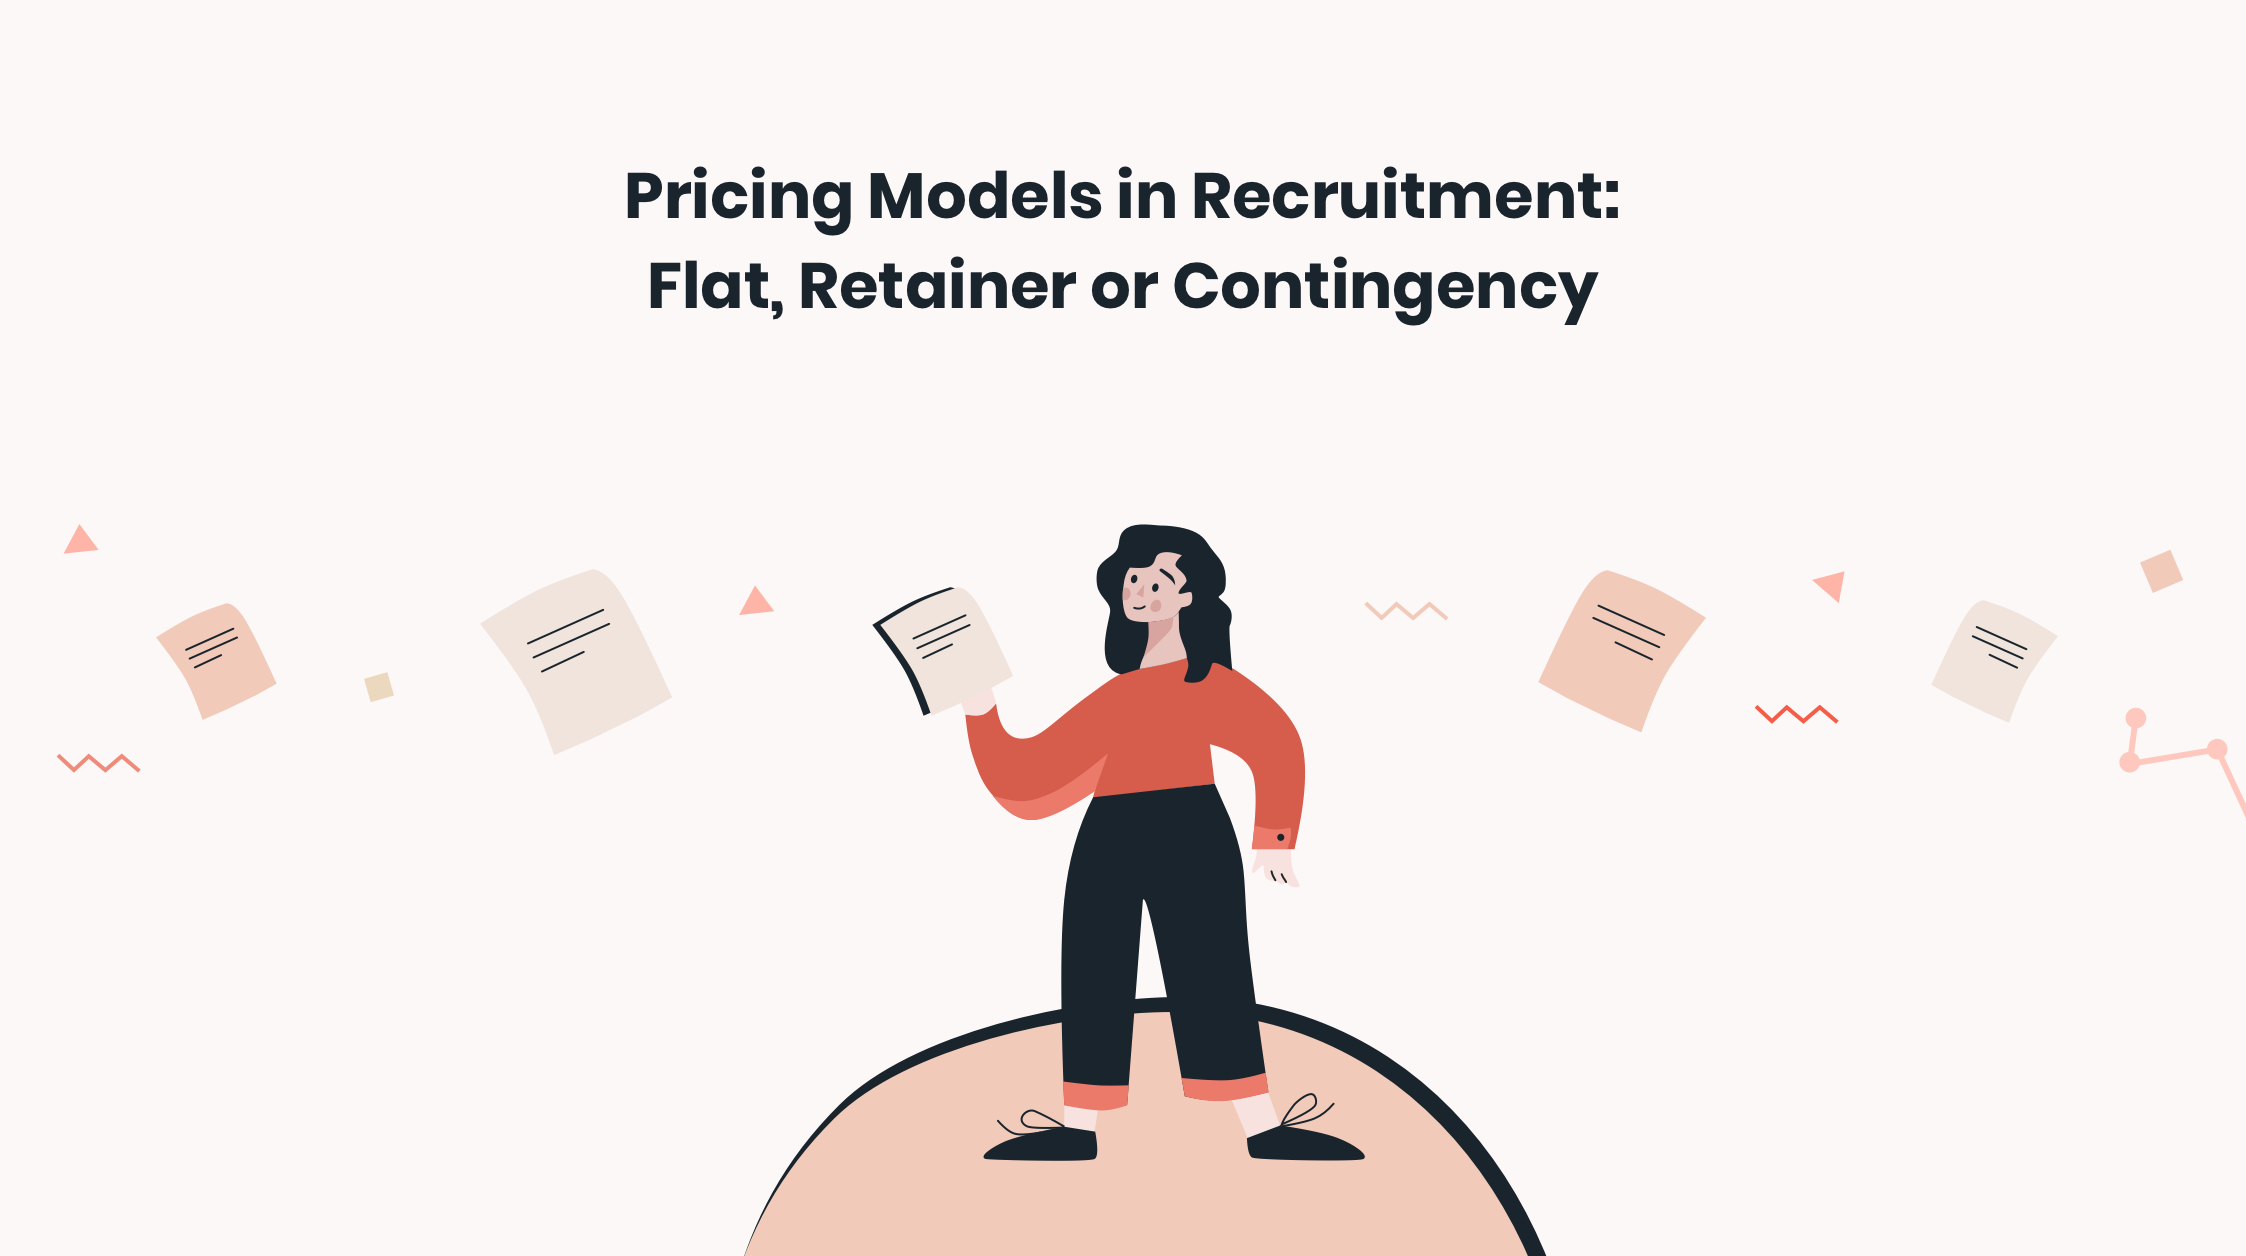 Pricing Models in Recruitment: Flat, Retainer or Contingency